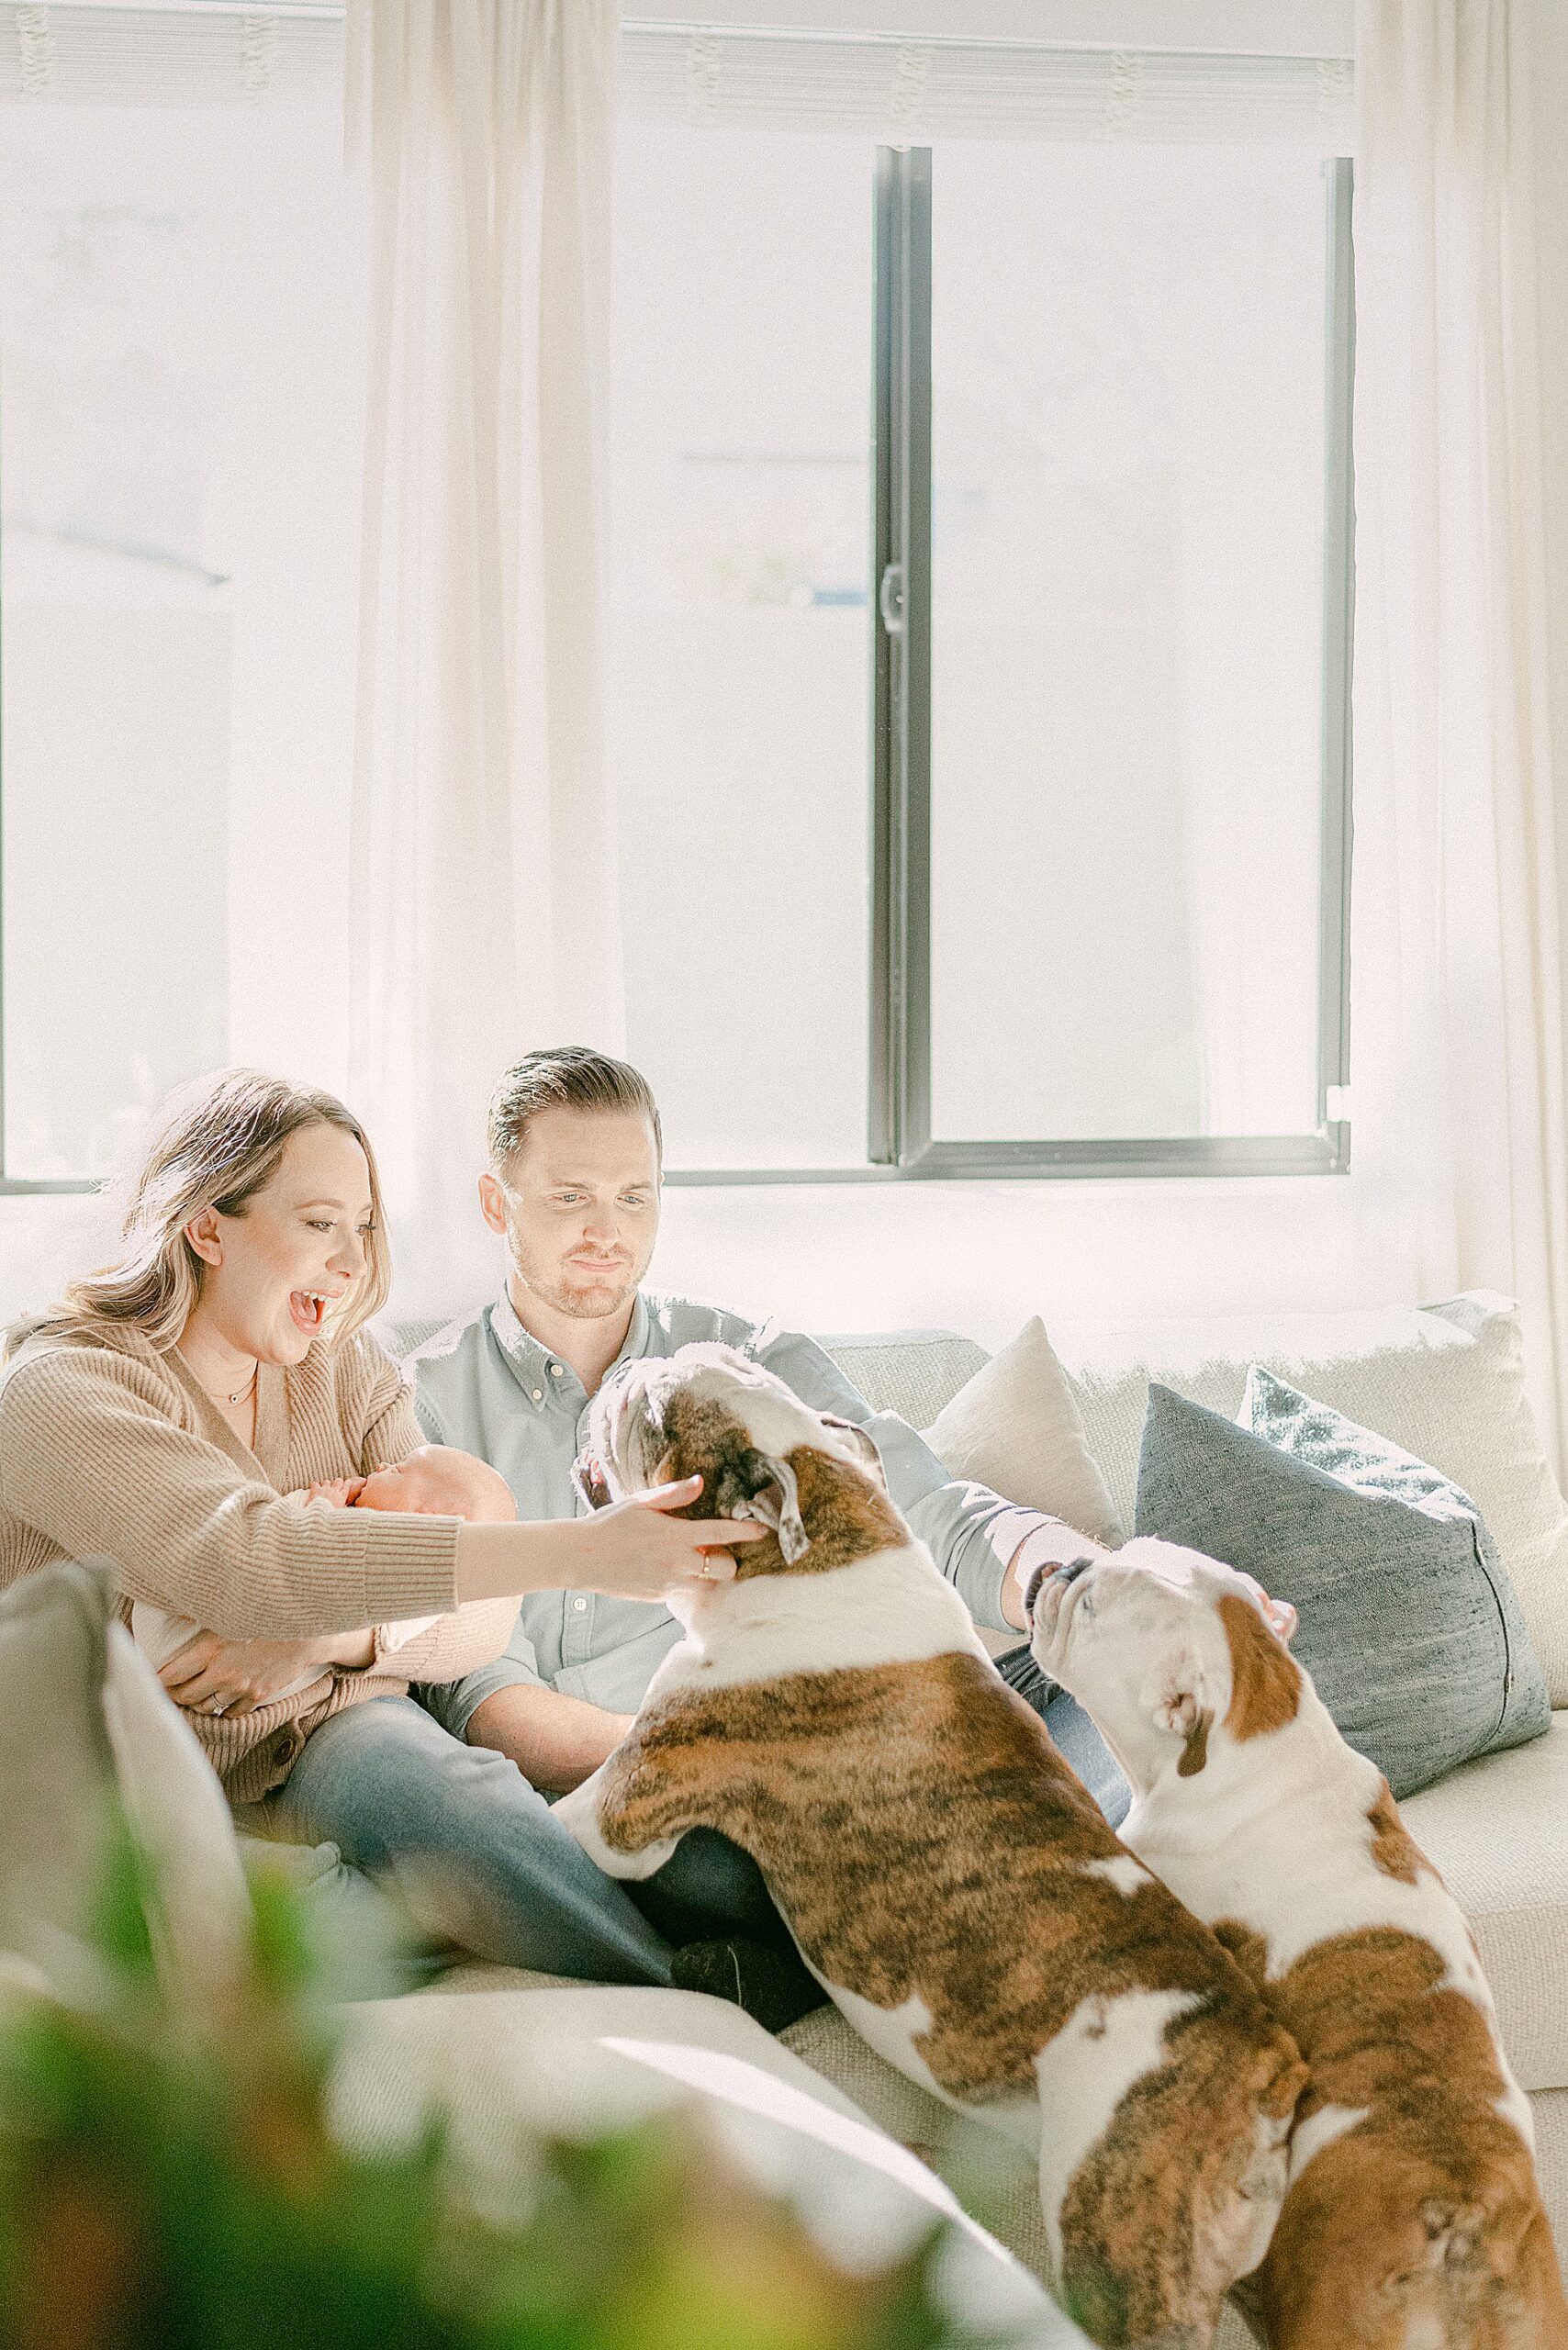 New parents holding baby while sitting on couch in front of large open window with natural light shining through. Parents are petting two excited English Bulldogs